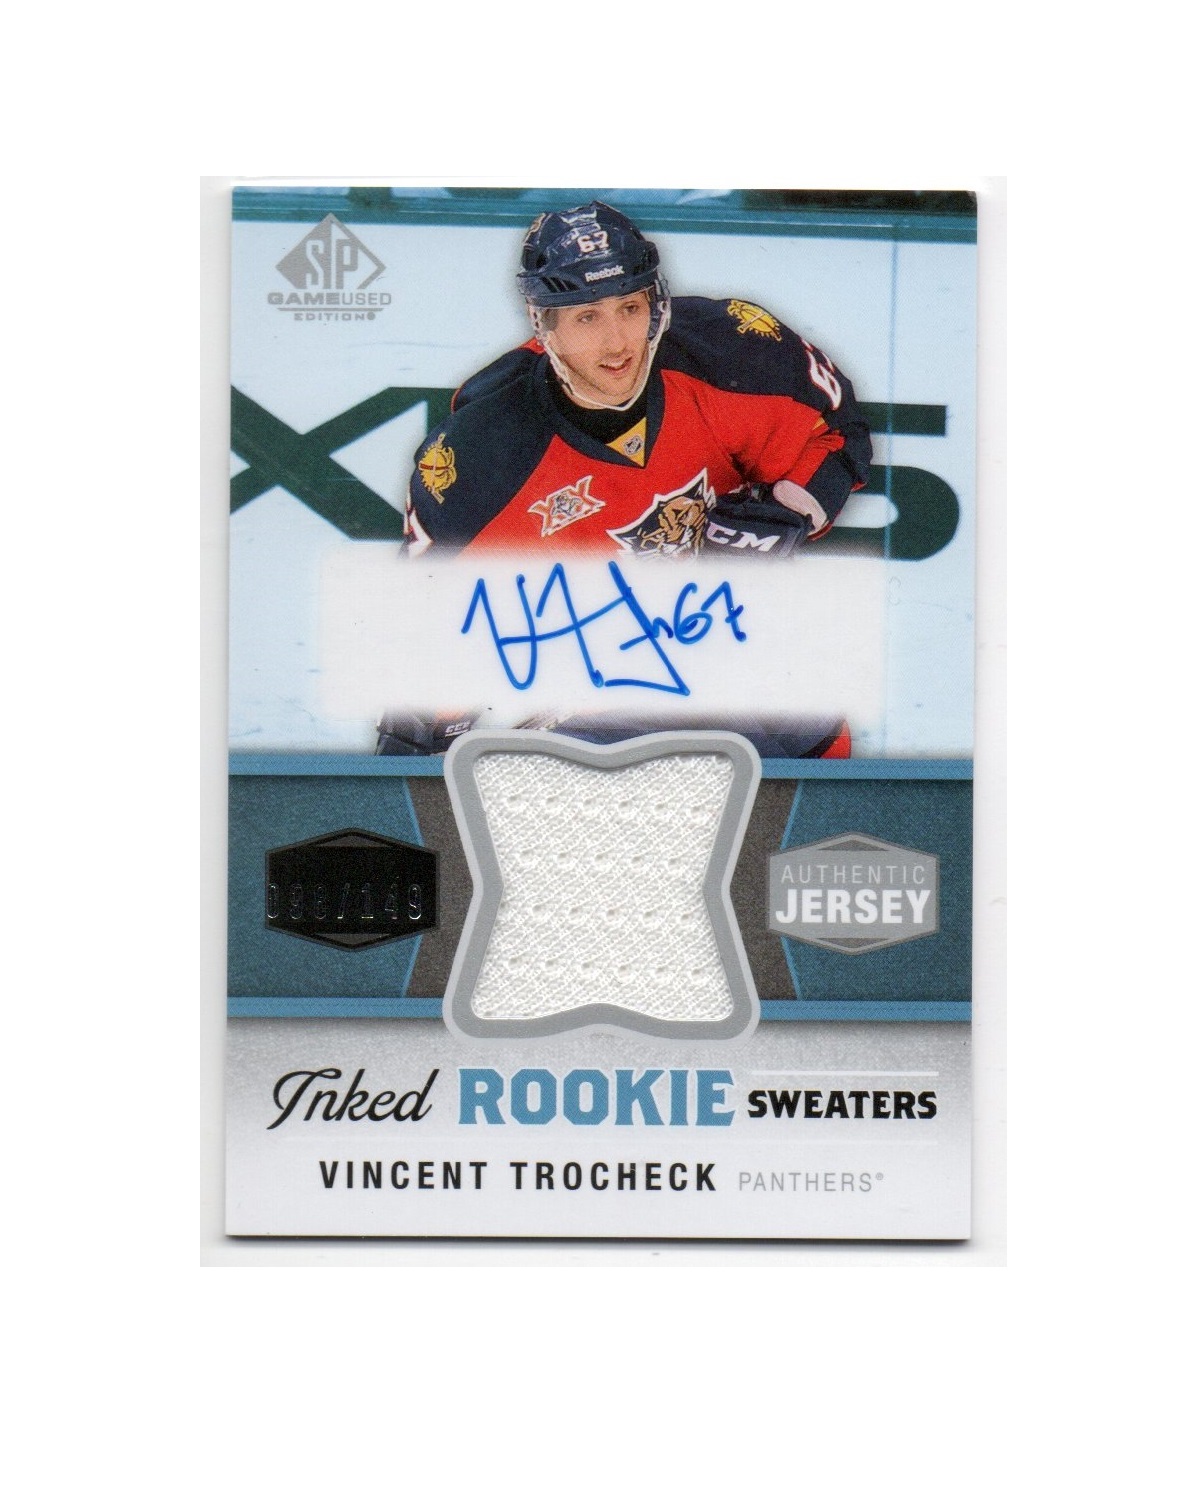 2014-15 SP Game Used Inked Rookie Sweaters #IRSVT Vincent Trocheck (60-X143-NHLPANTHERS)